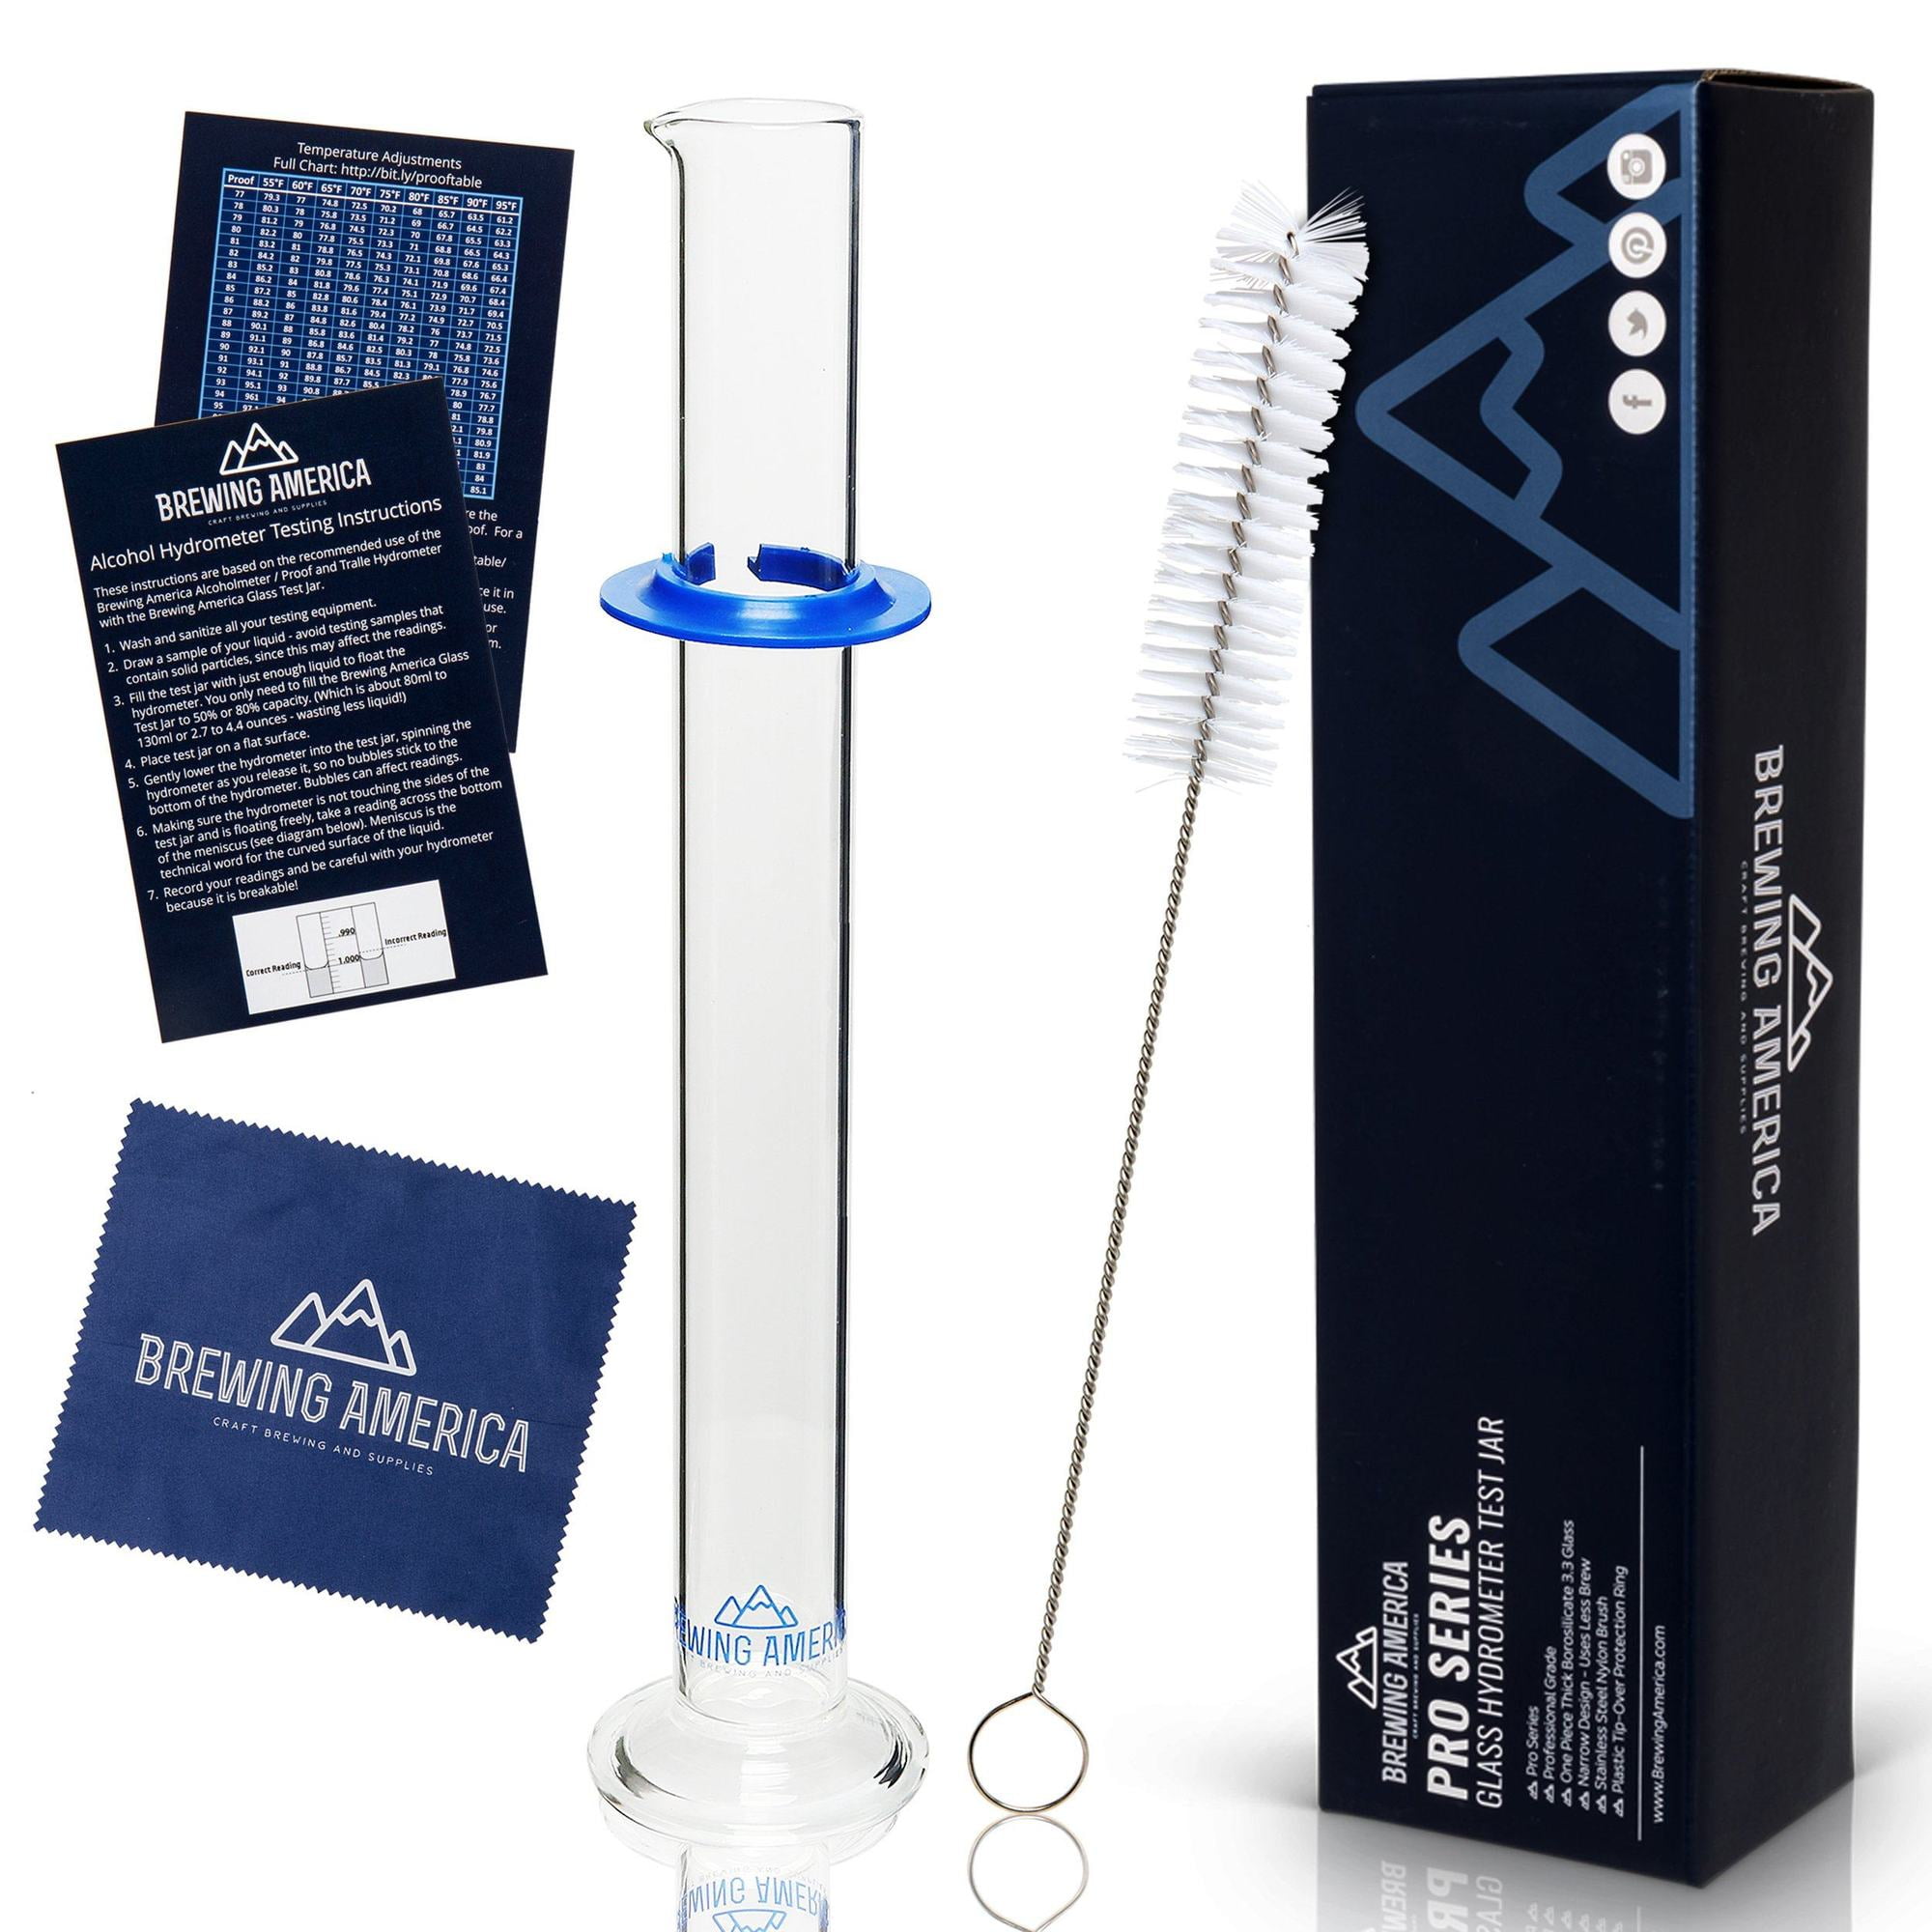 Hydrometer Alcohol Meter Test Kit Distilled Alcohol American-Made 0-200 Proof Pro Series Glass Jar